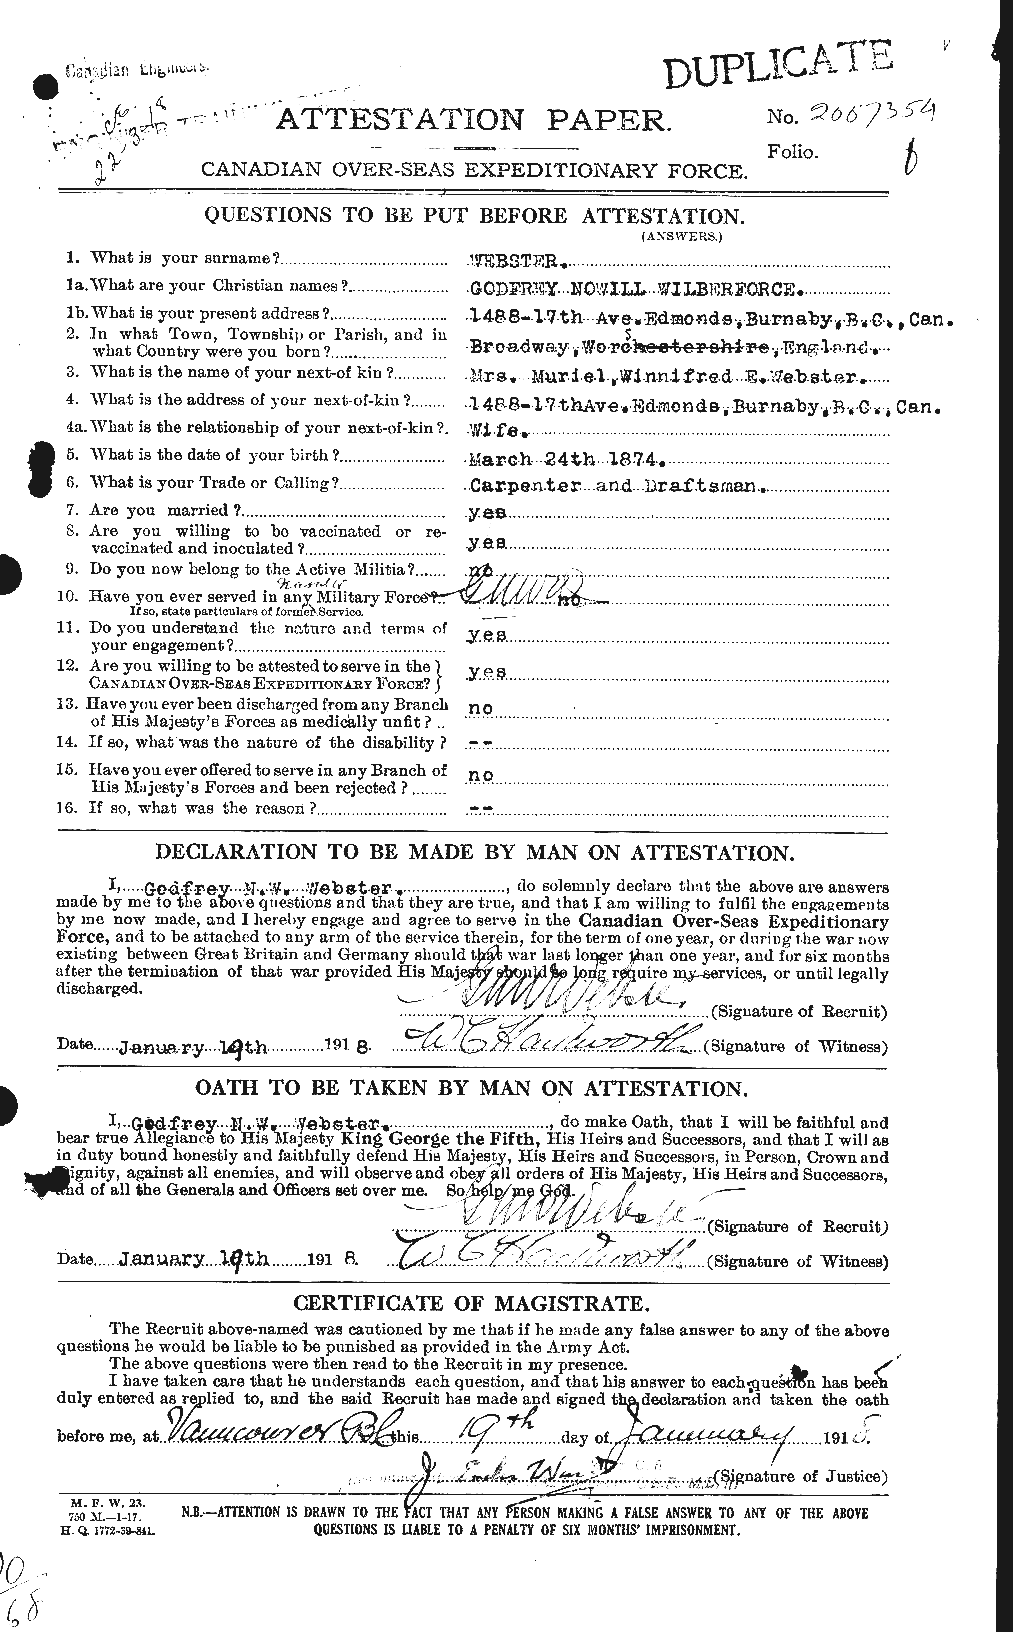 Personnel Records of the First World War - CEF 670396a